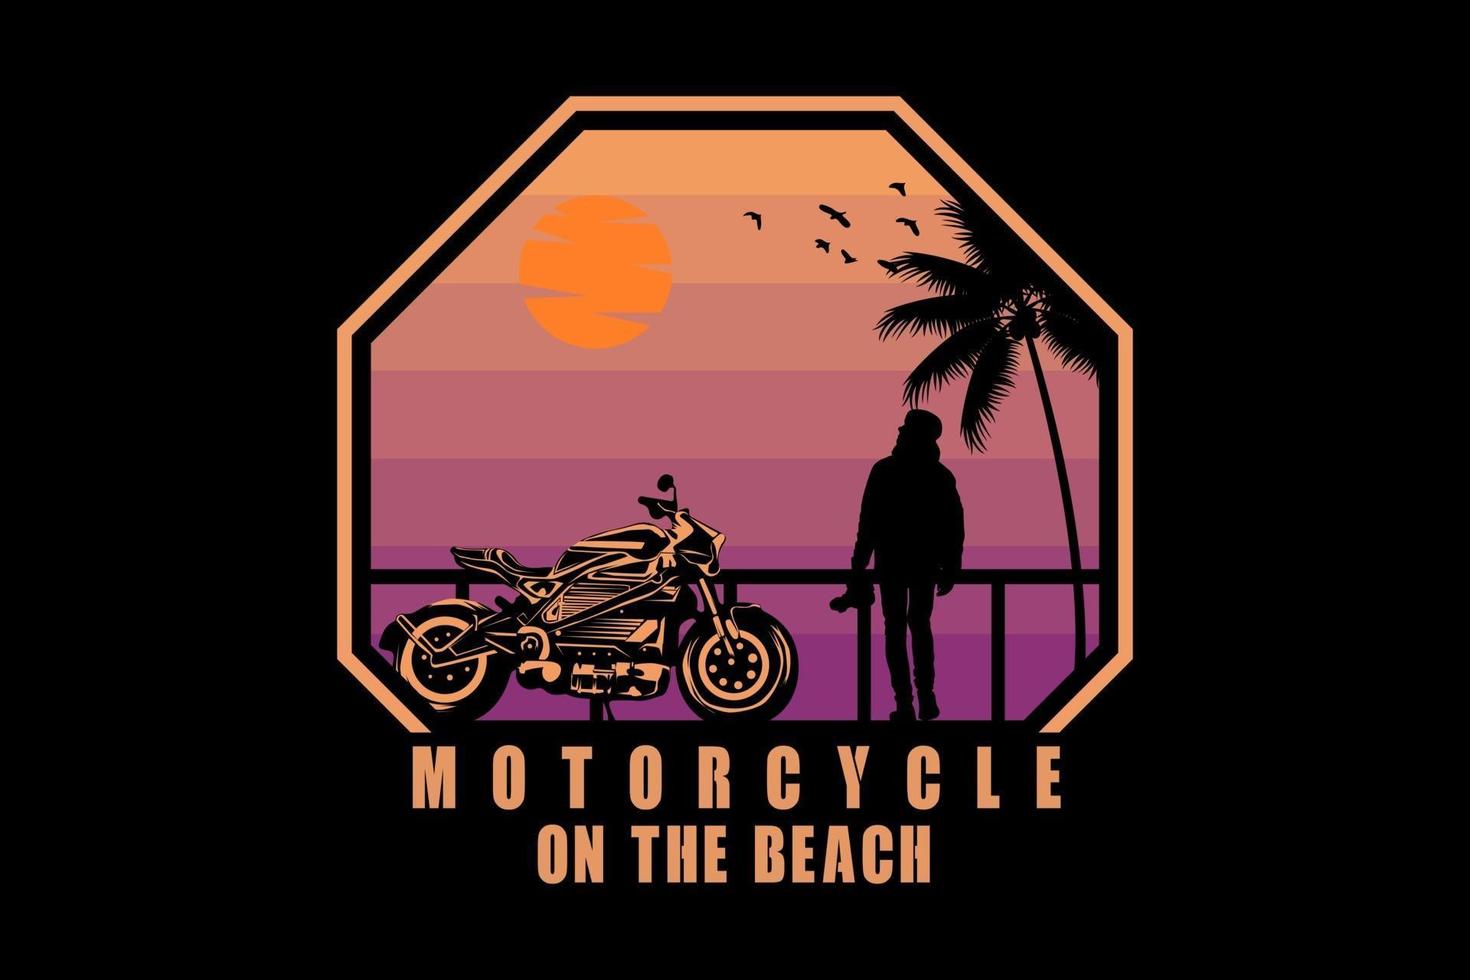 Motorcycle on the beach silhouette design vector